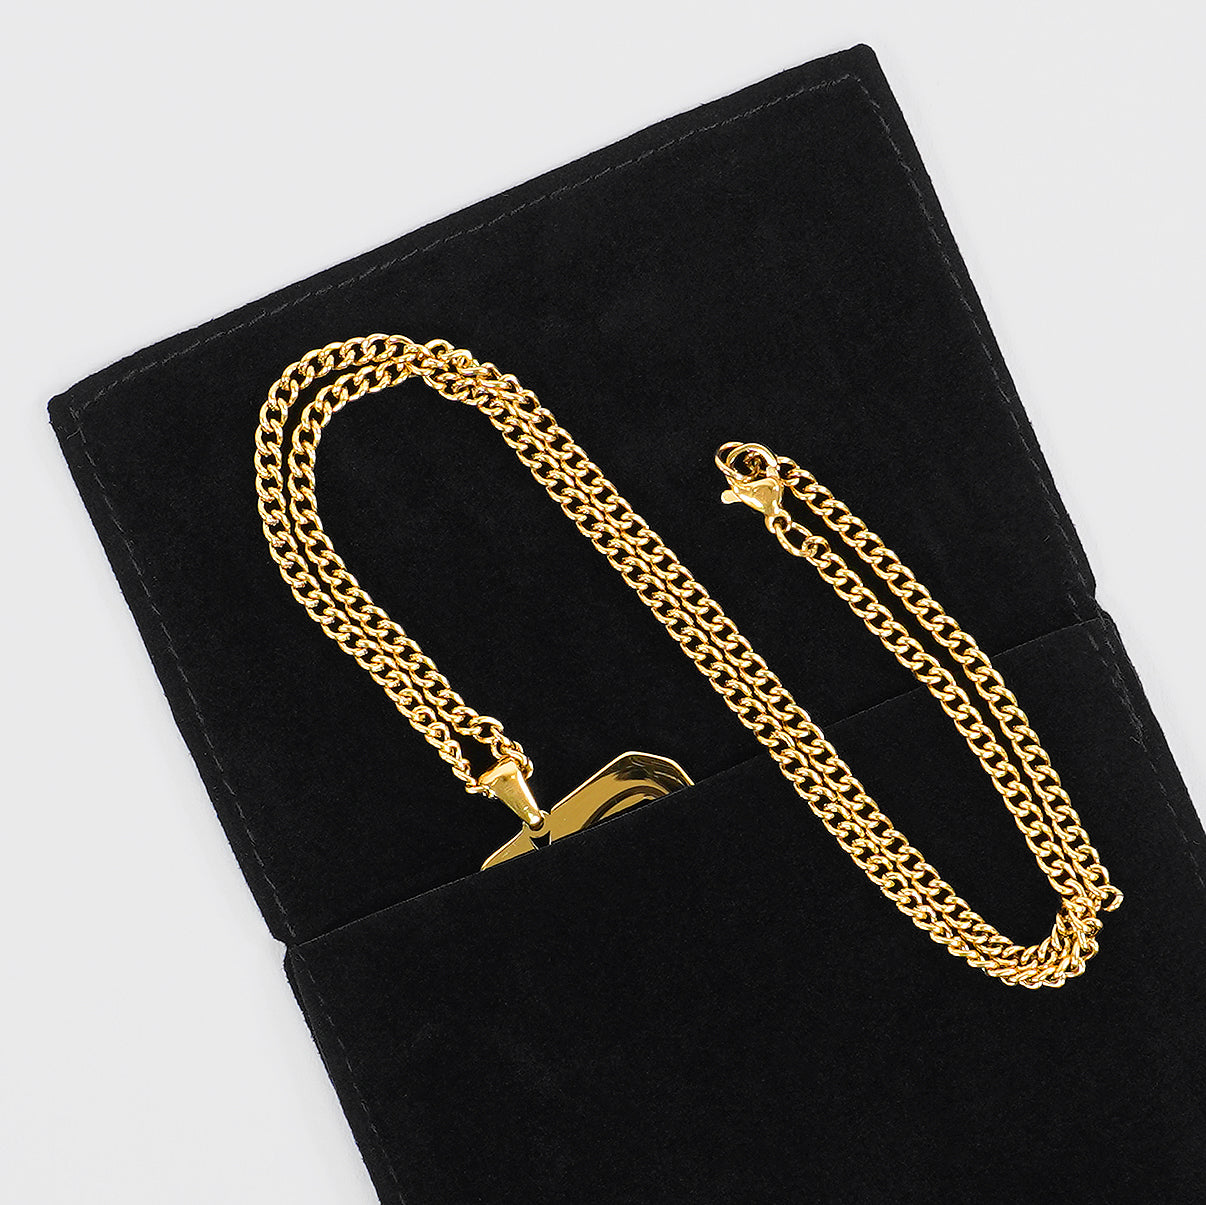 22 Number Pendant with Chain Necklace - Gold Plated Stainless Steel